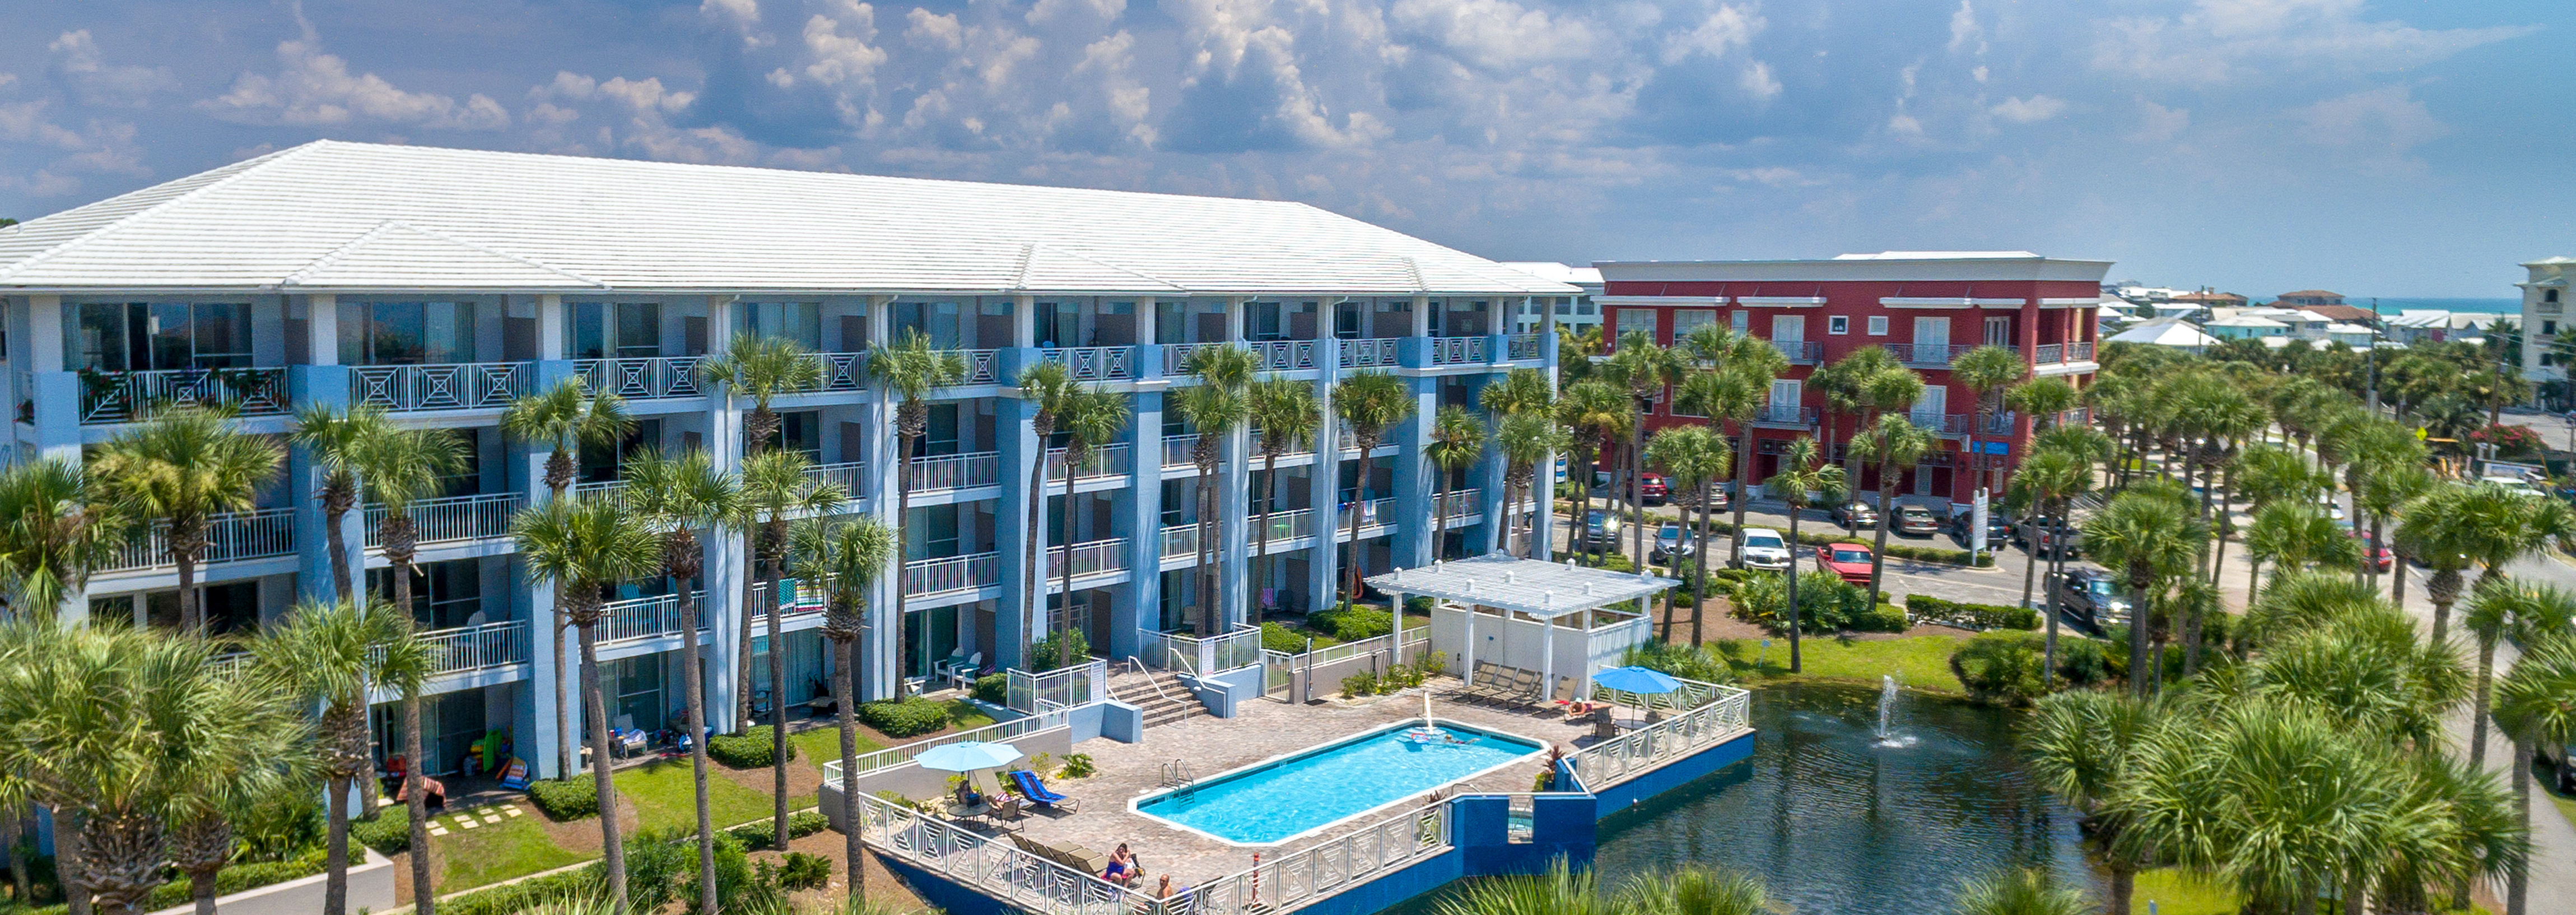 A photo of Gulf Place Cabanas and pool